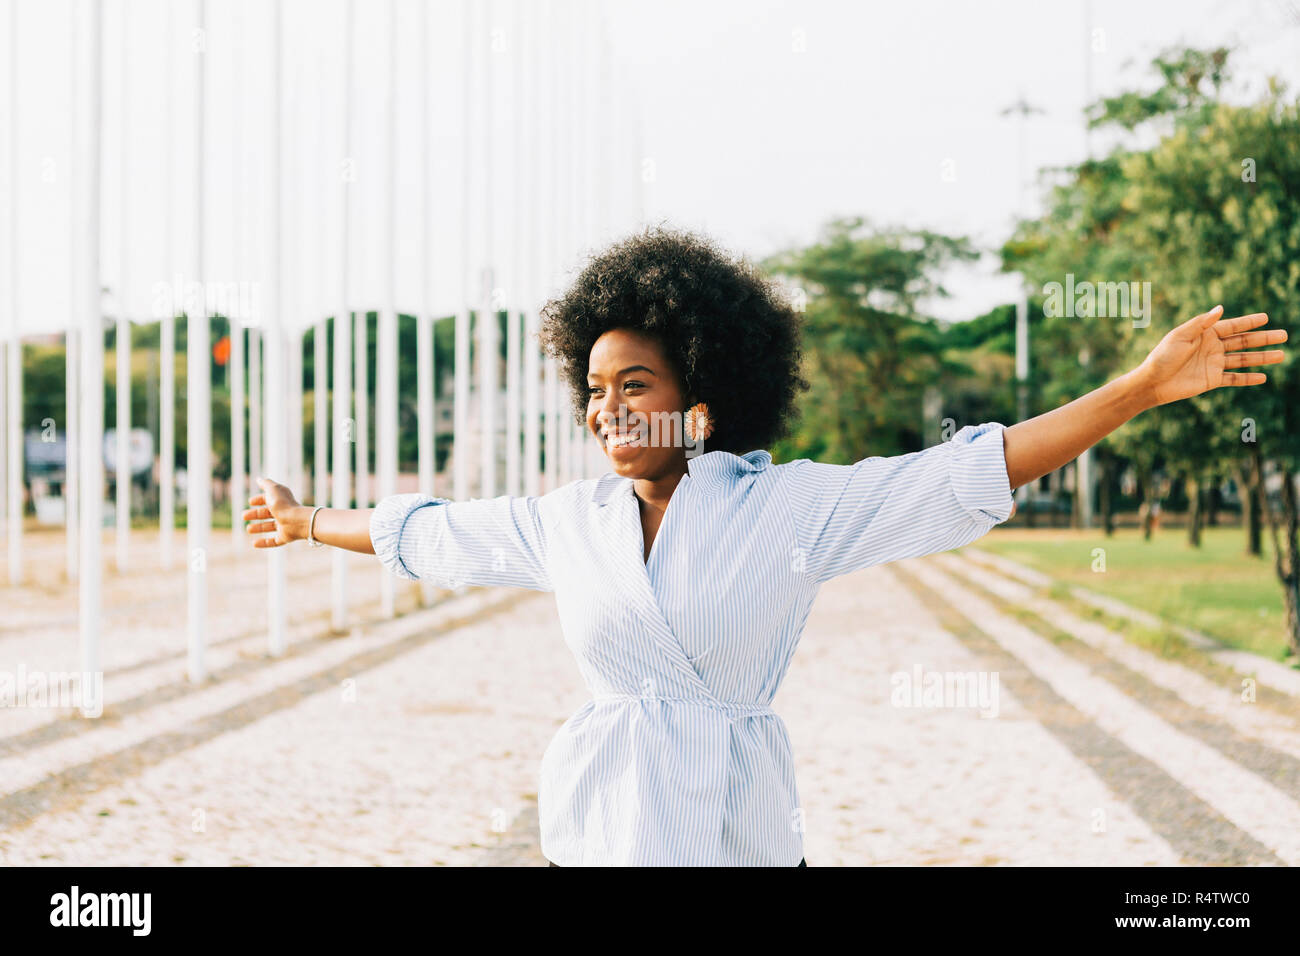 Carefree young woman with arms outstretched in sunny park Stock Photo